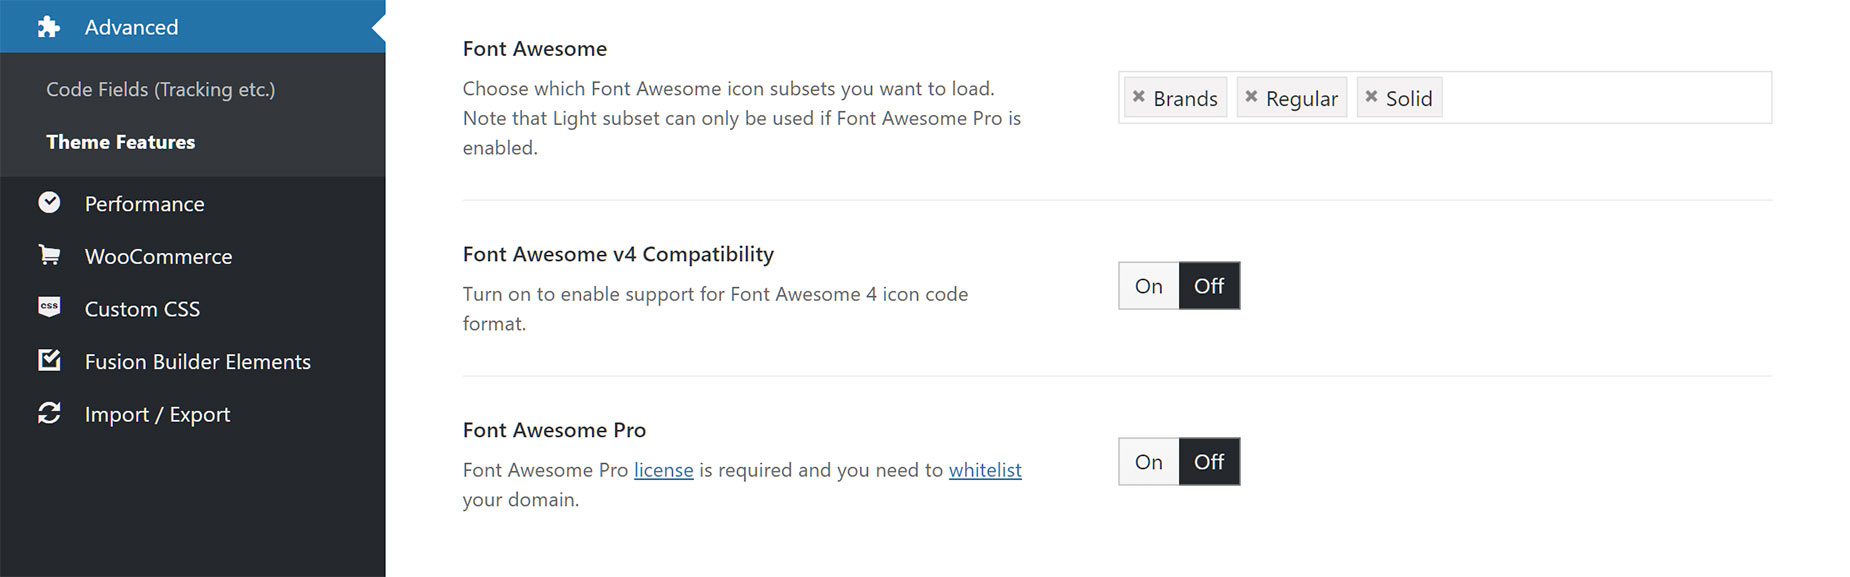 Font Awesome Icon Options